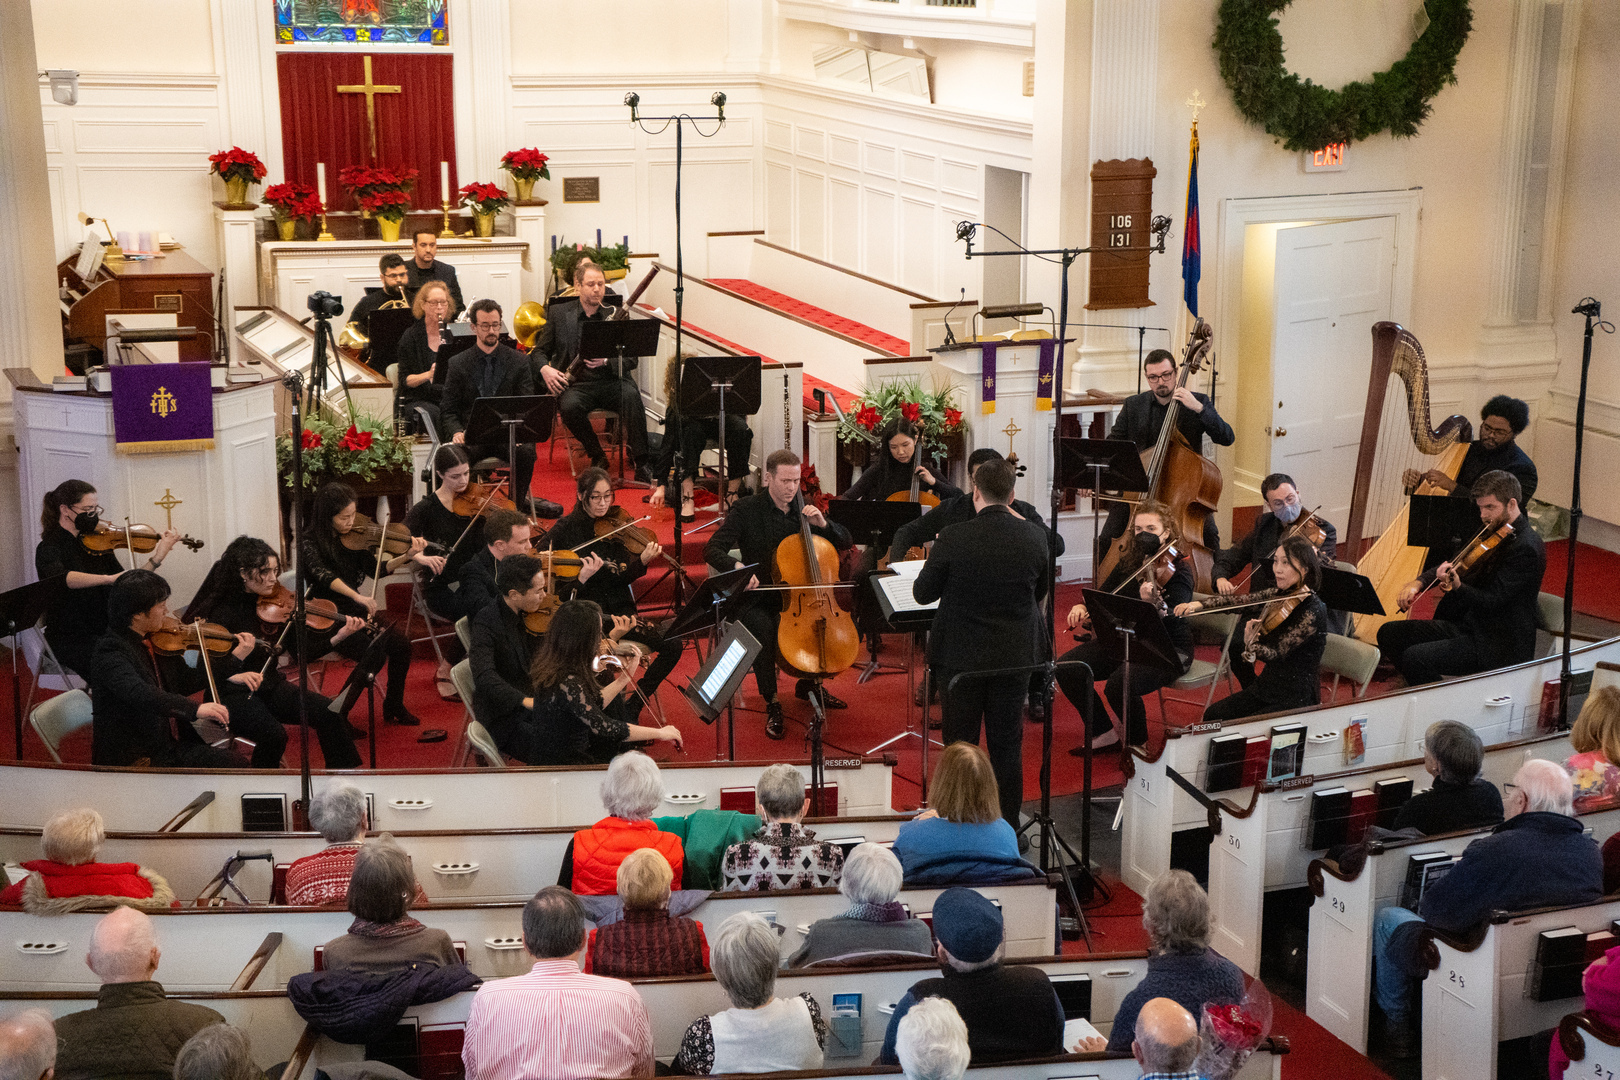 Holiday in Vienna: Cape Cod Chamber Orchestra, Harwich, Massachusetts, United States